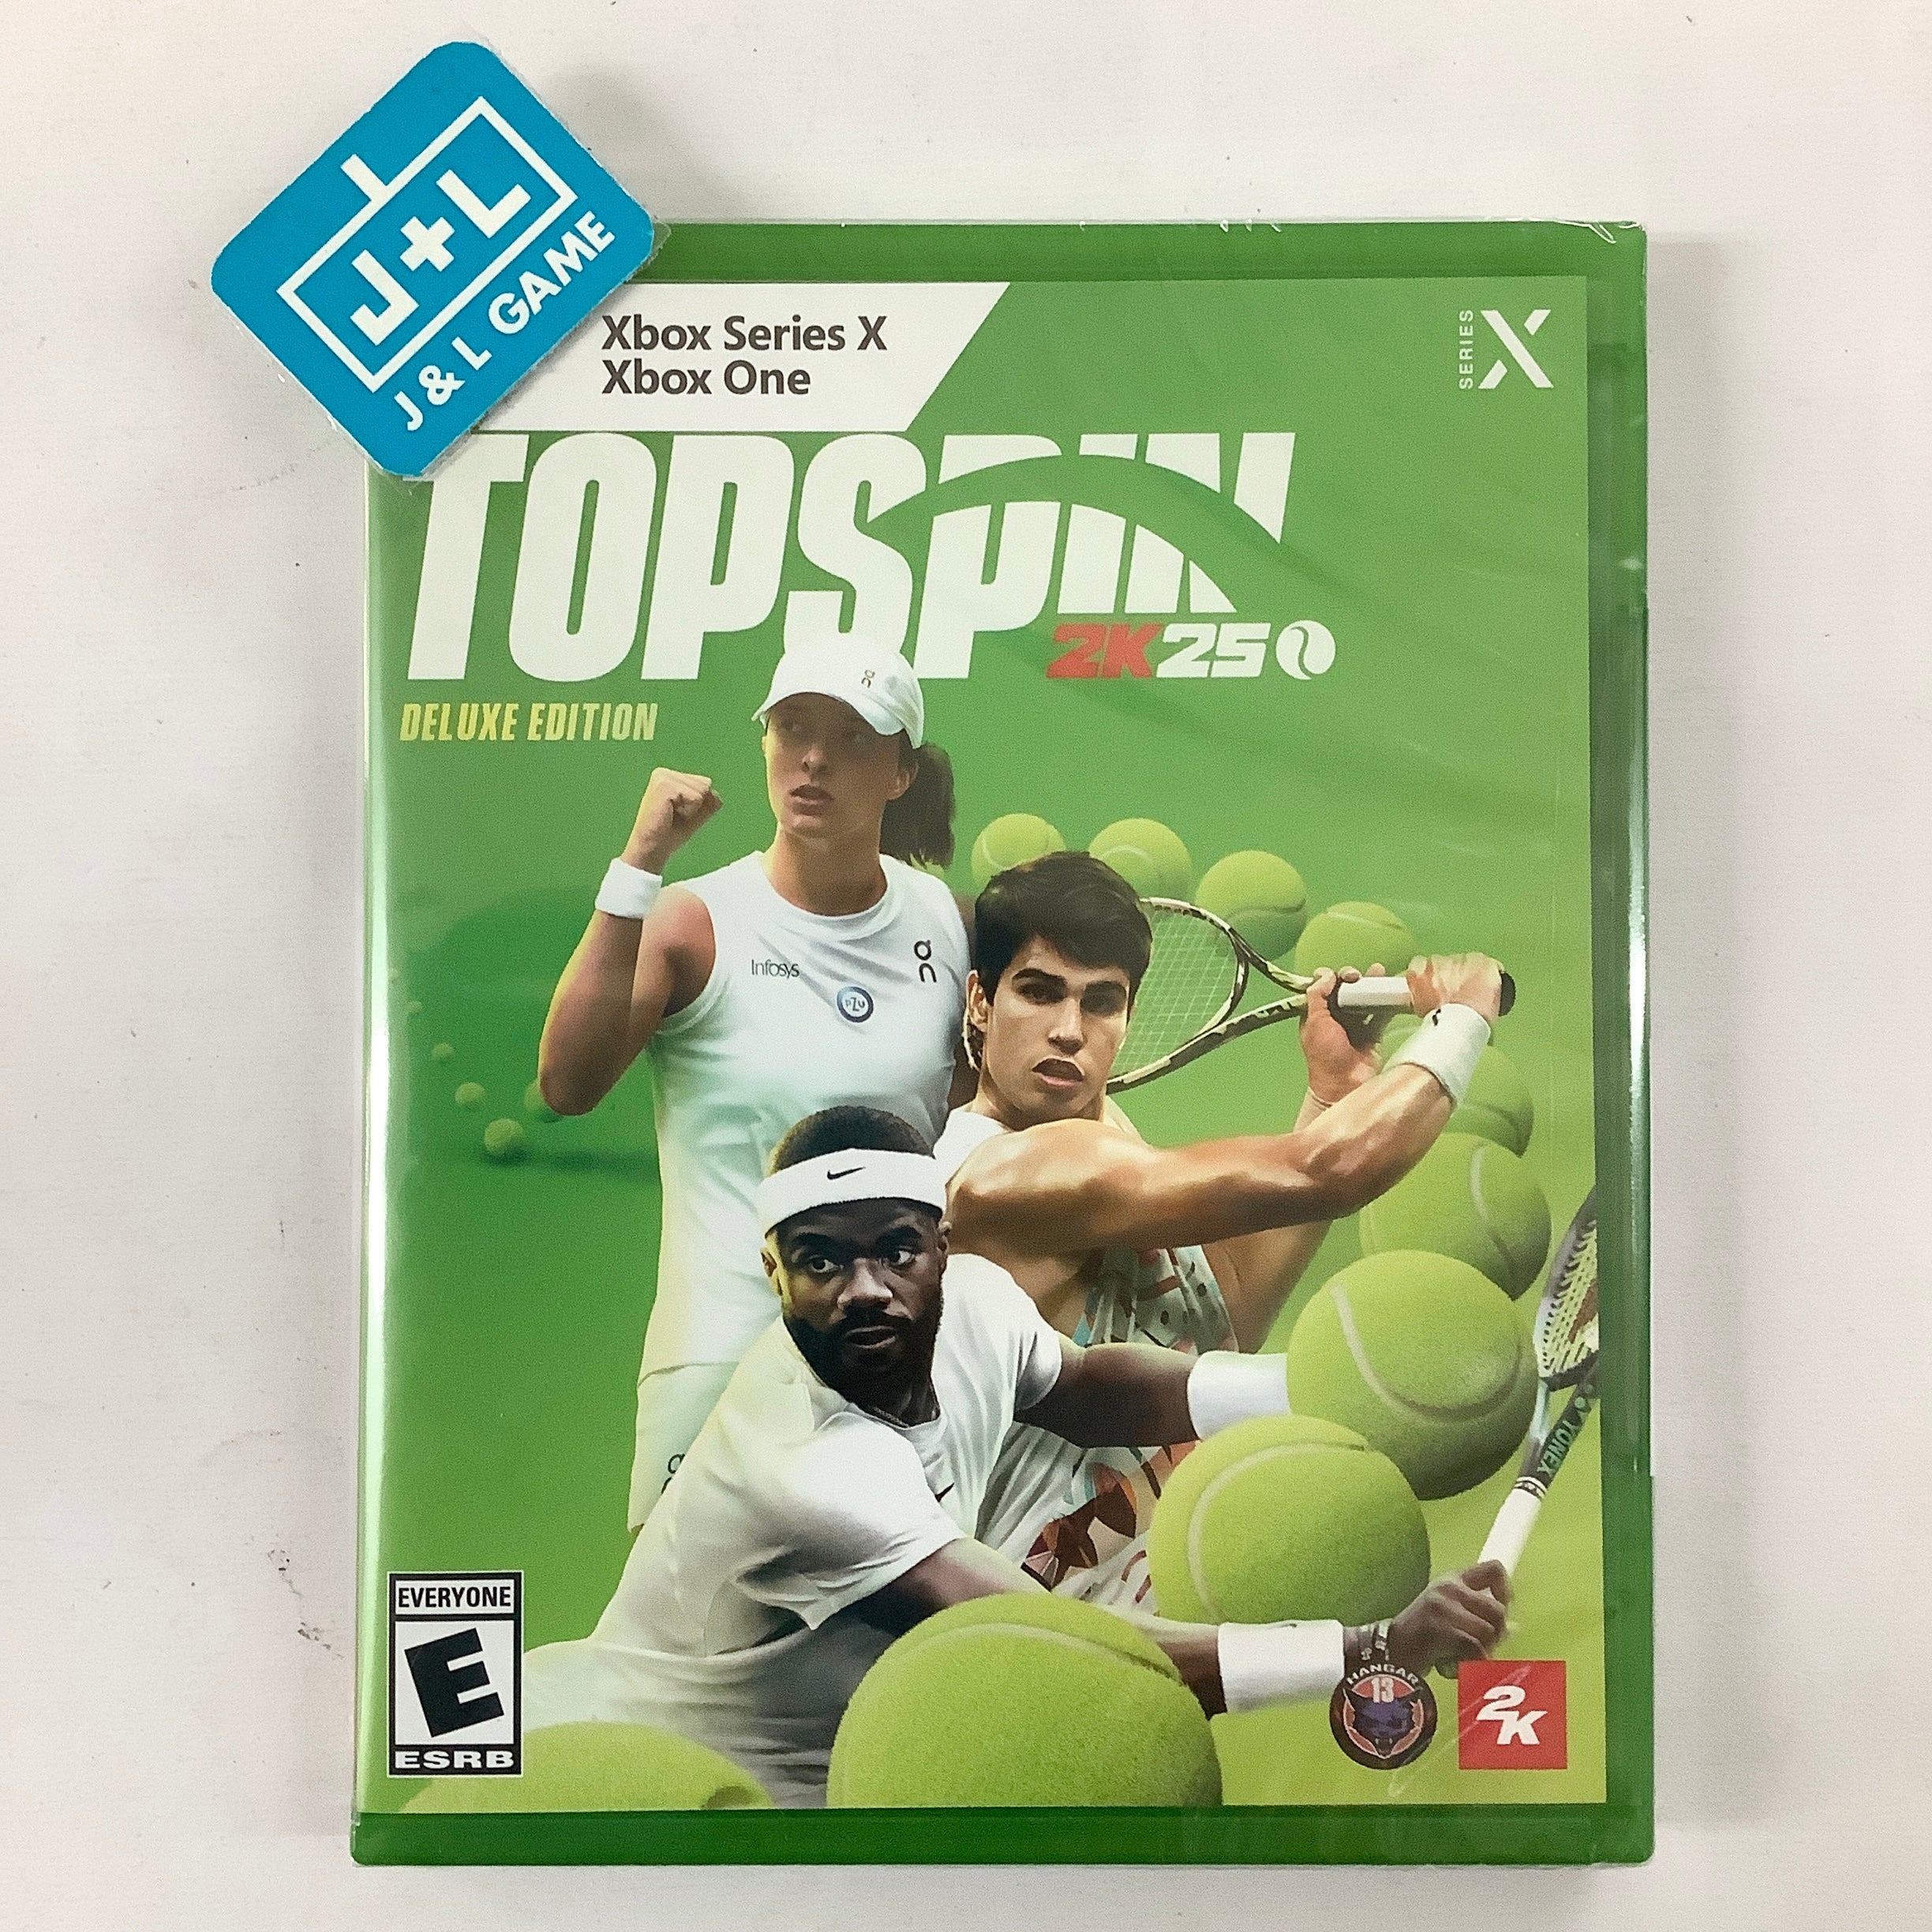 TopSpin 2K25 (Deluxe Edition) - (XSX) Xbox Series X Video Games 2K   